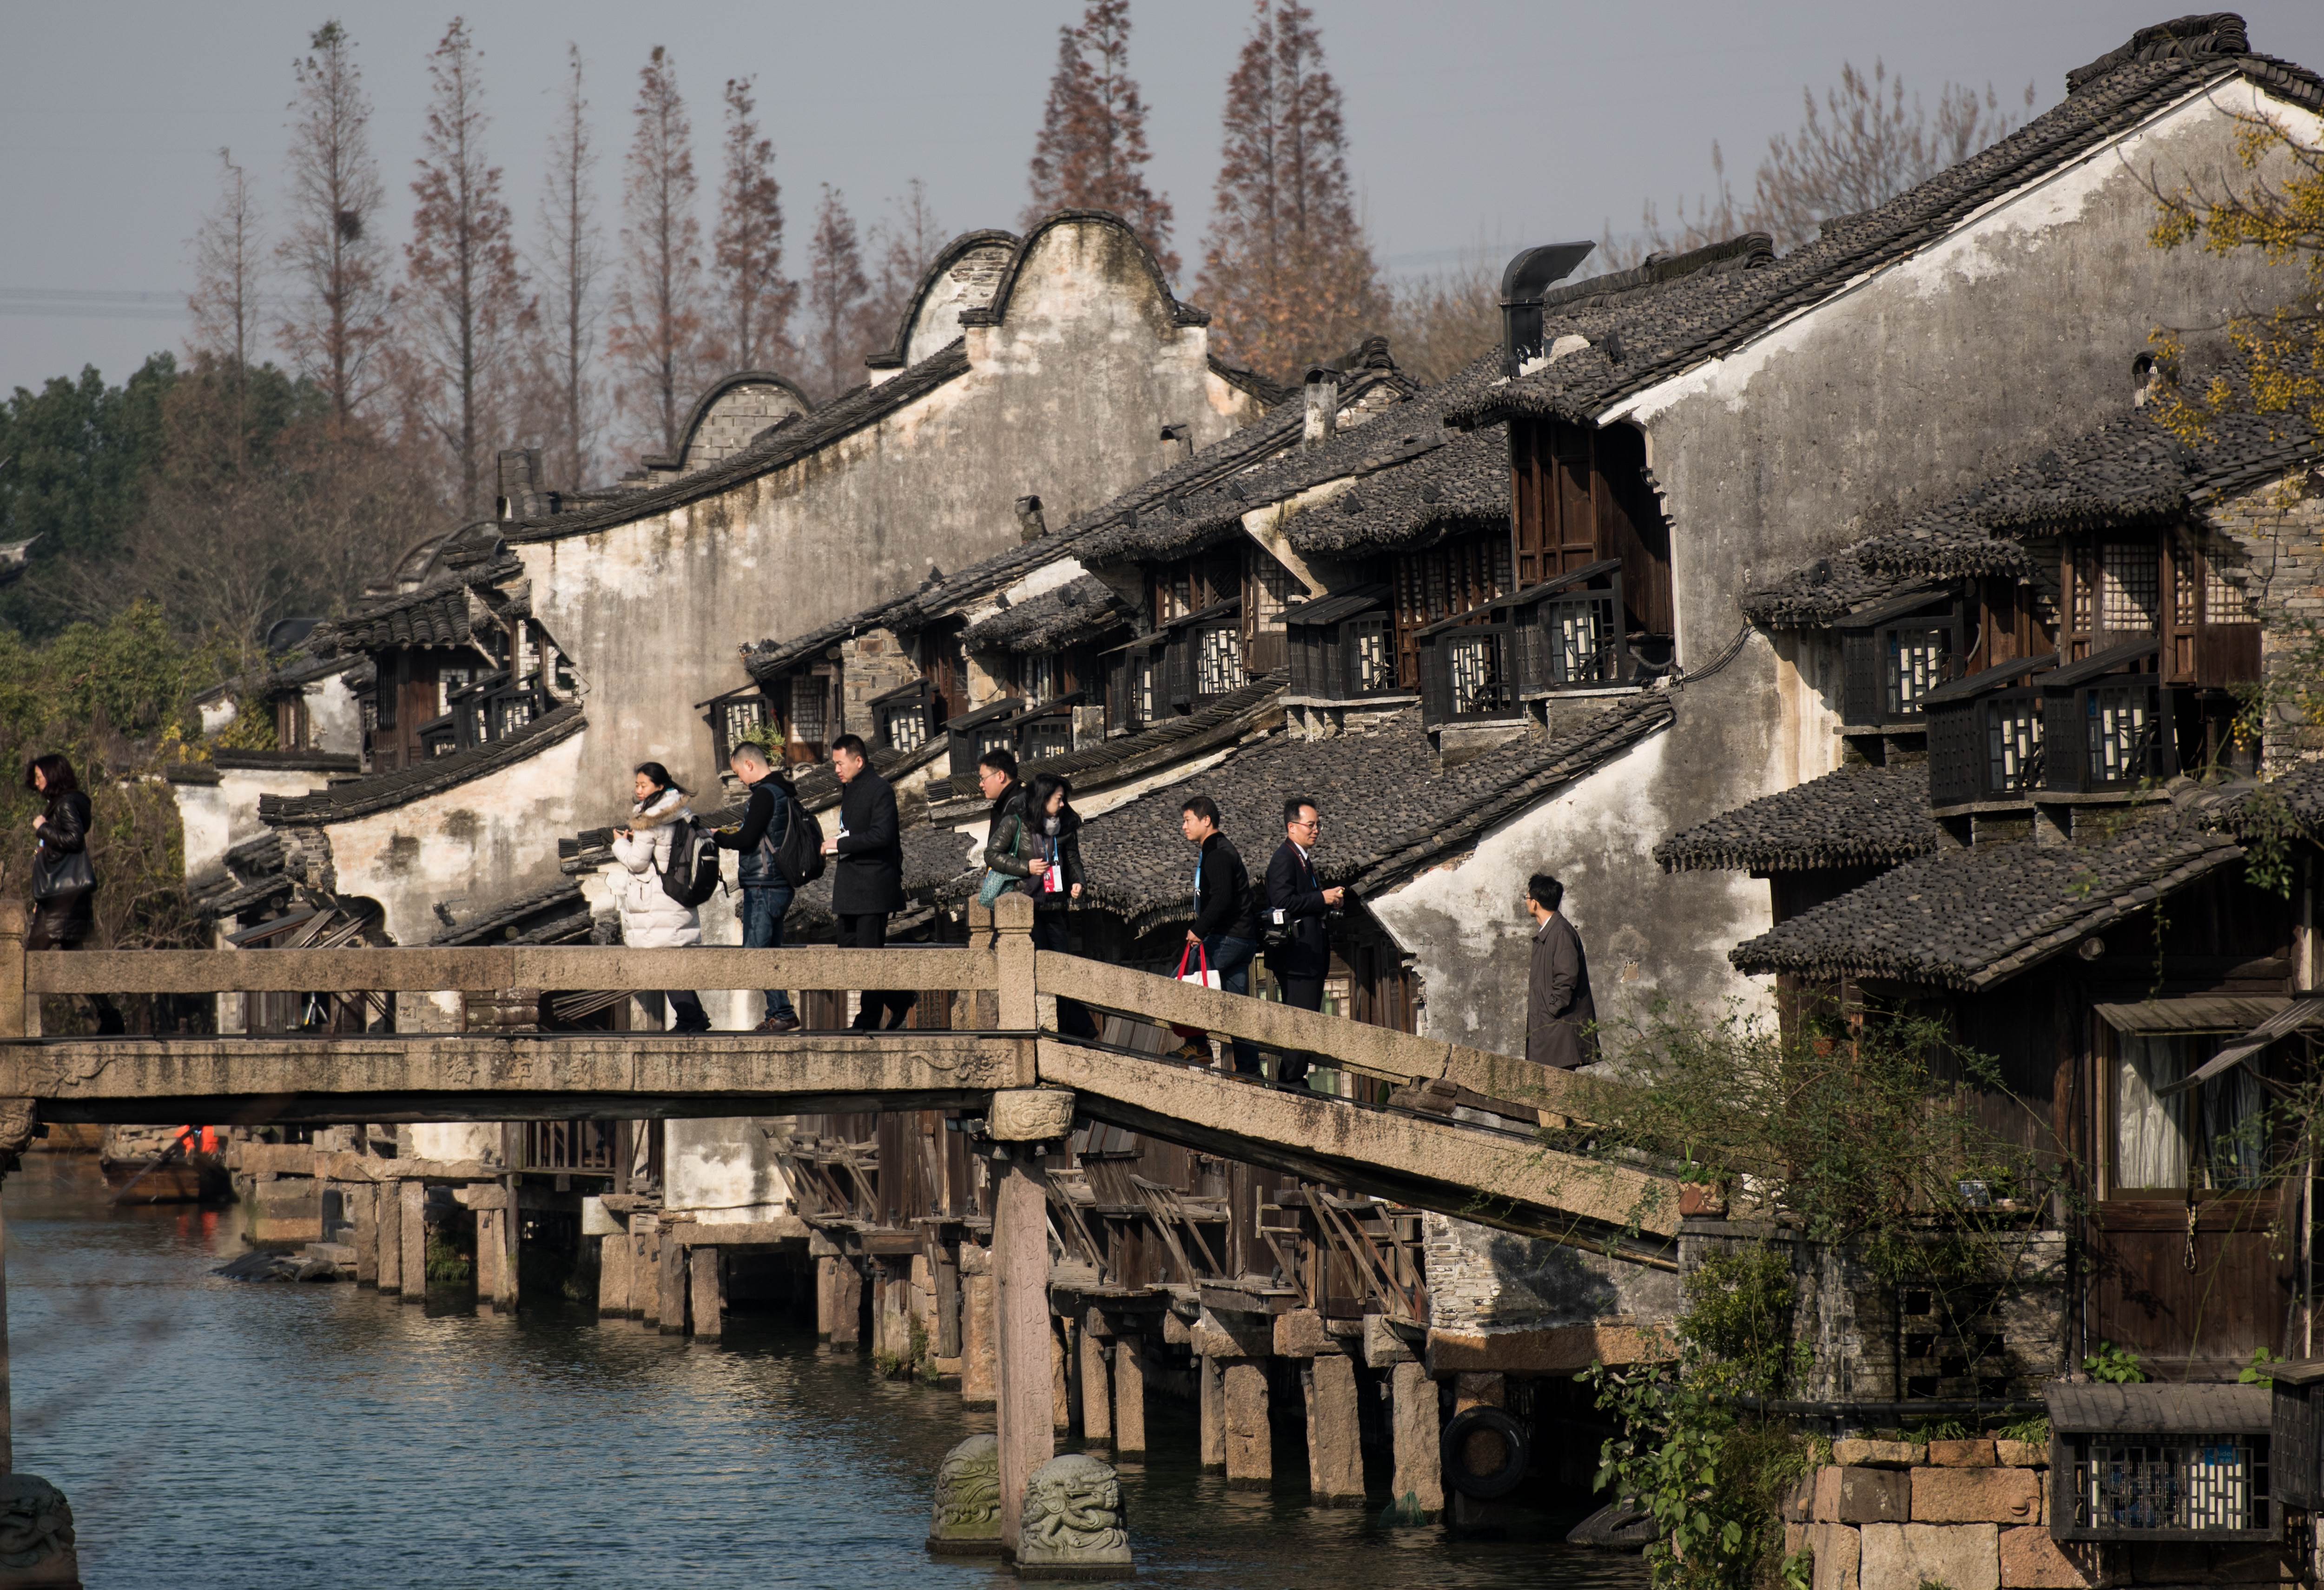 Participants cross a bridge to enter the World Internet Conference venue in the scenic town of Wuzhen in eastern China's Zhejiang province on December 16, 2015. China's second World Internet Conference begins in Wuzhen with officials from technology giants including Nokia, Apple, Kaspersky, IBM and Samsung expected to attend. AFP PHOTO / JOHANNES EISELE